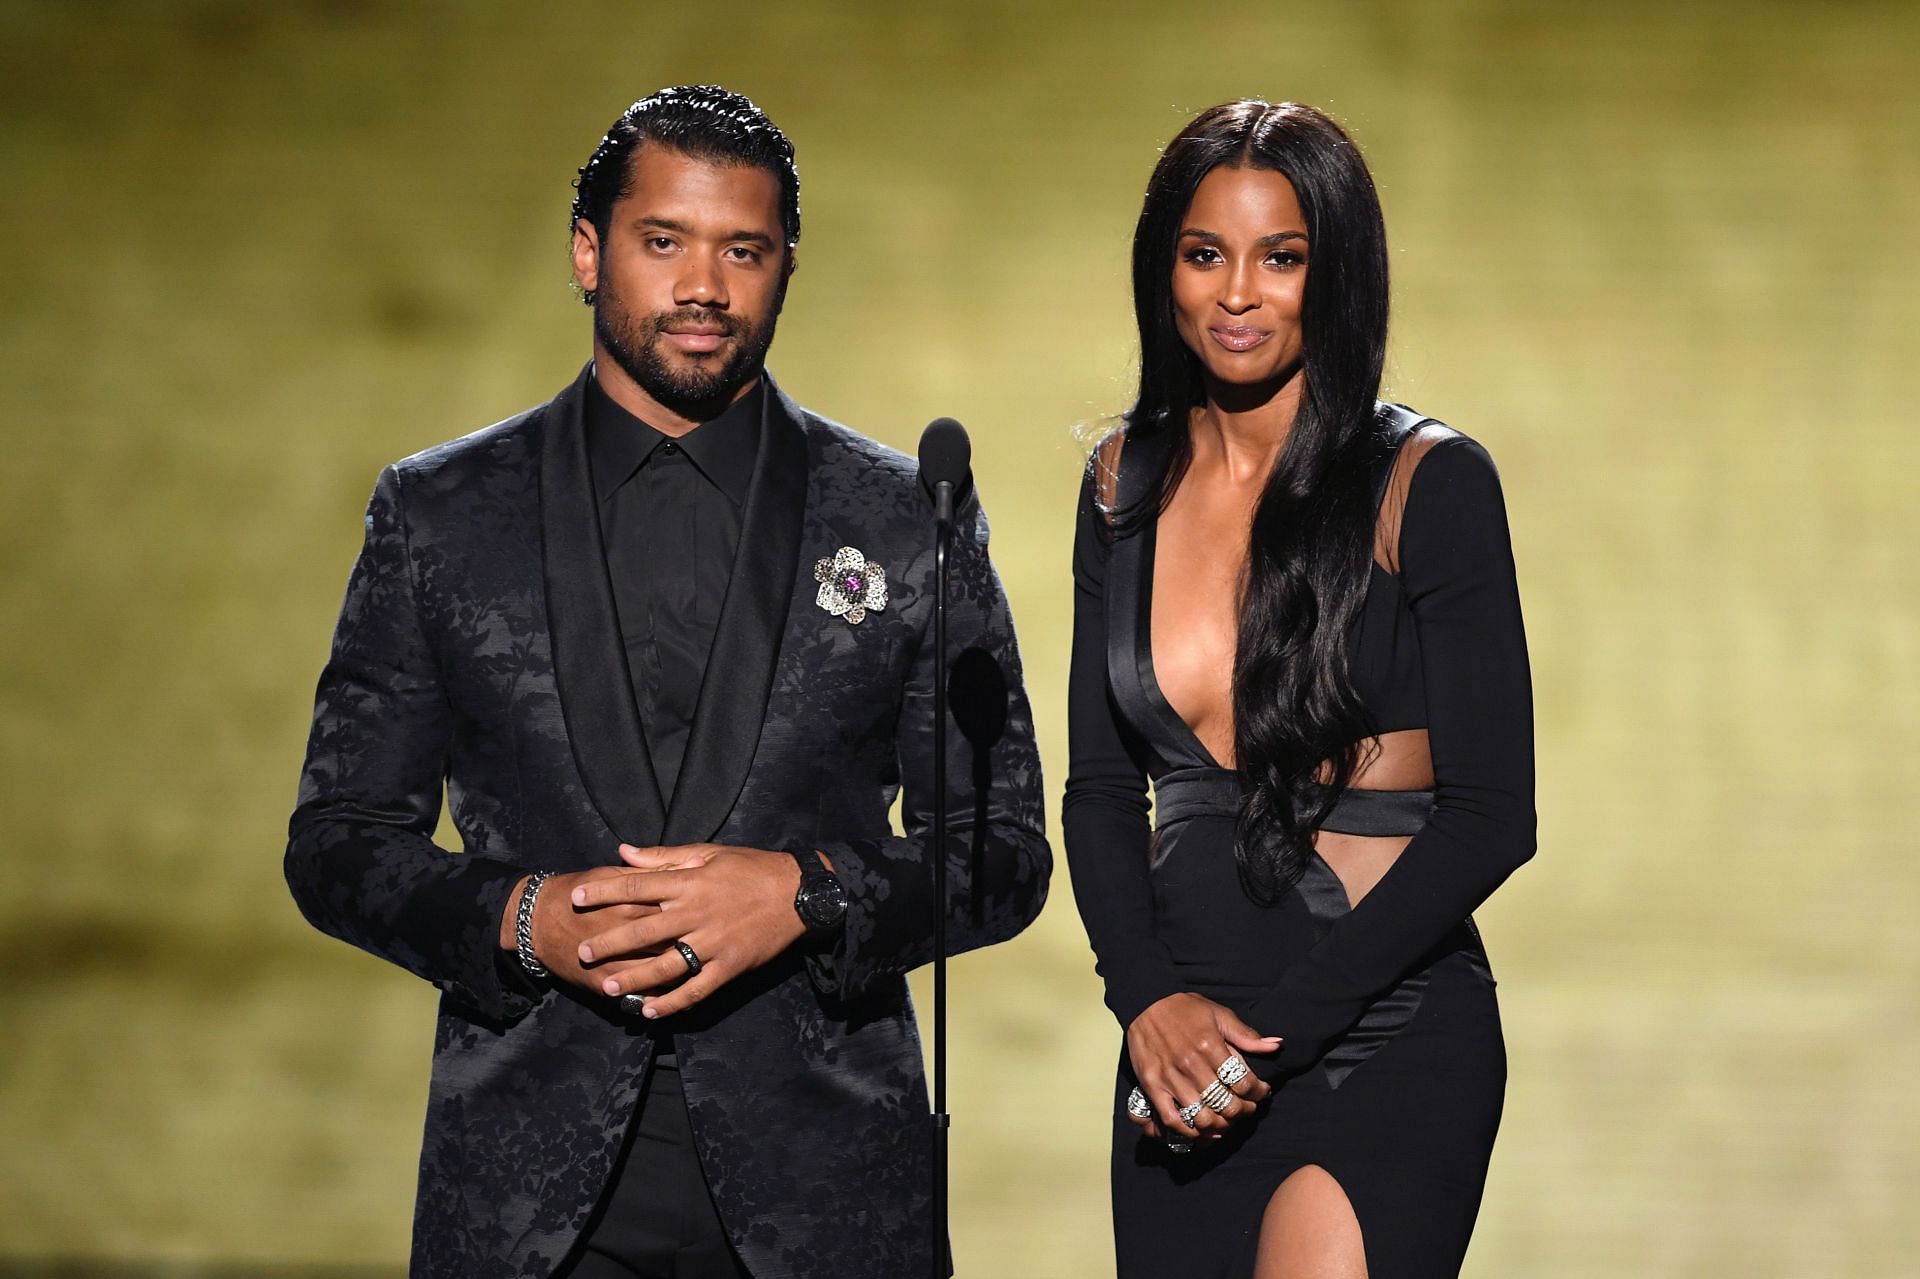 Russell Wilson and Ciara at the ESPYs